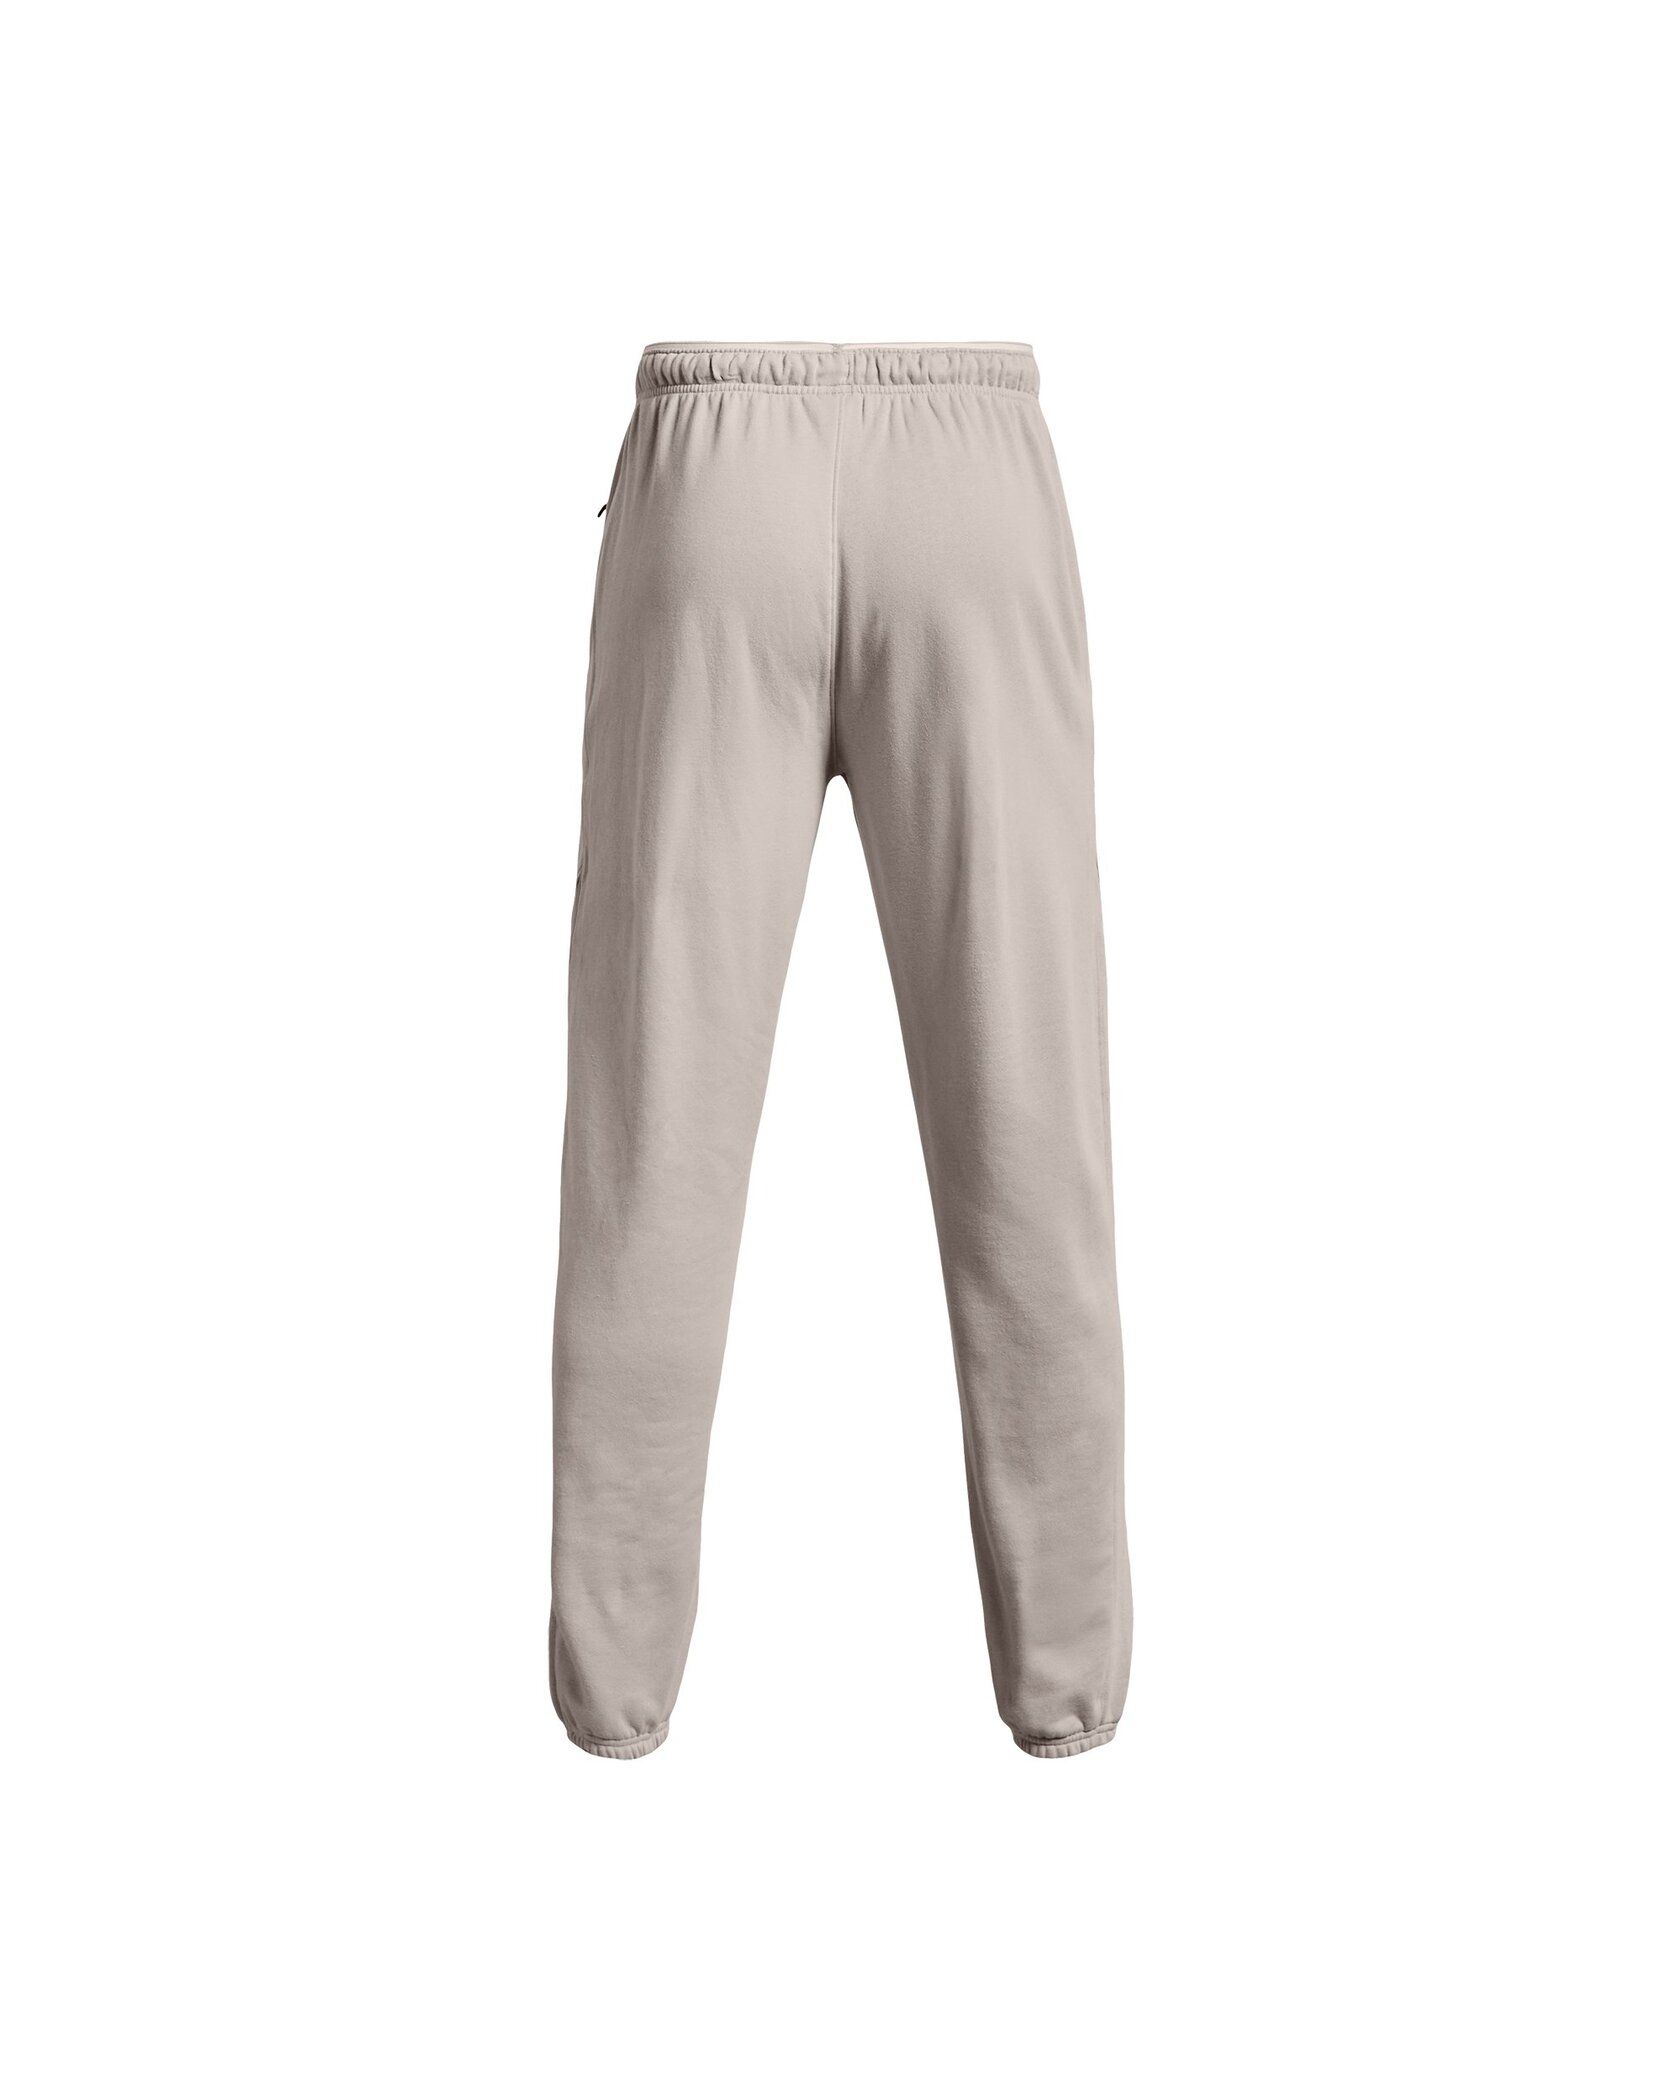 Buy Under Armour Men's Armour Fleece Joggers (1373362) from £24.97 (Today)  – Best Deals on